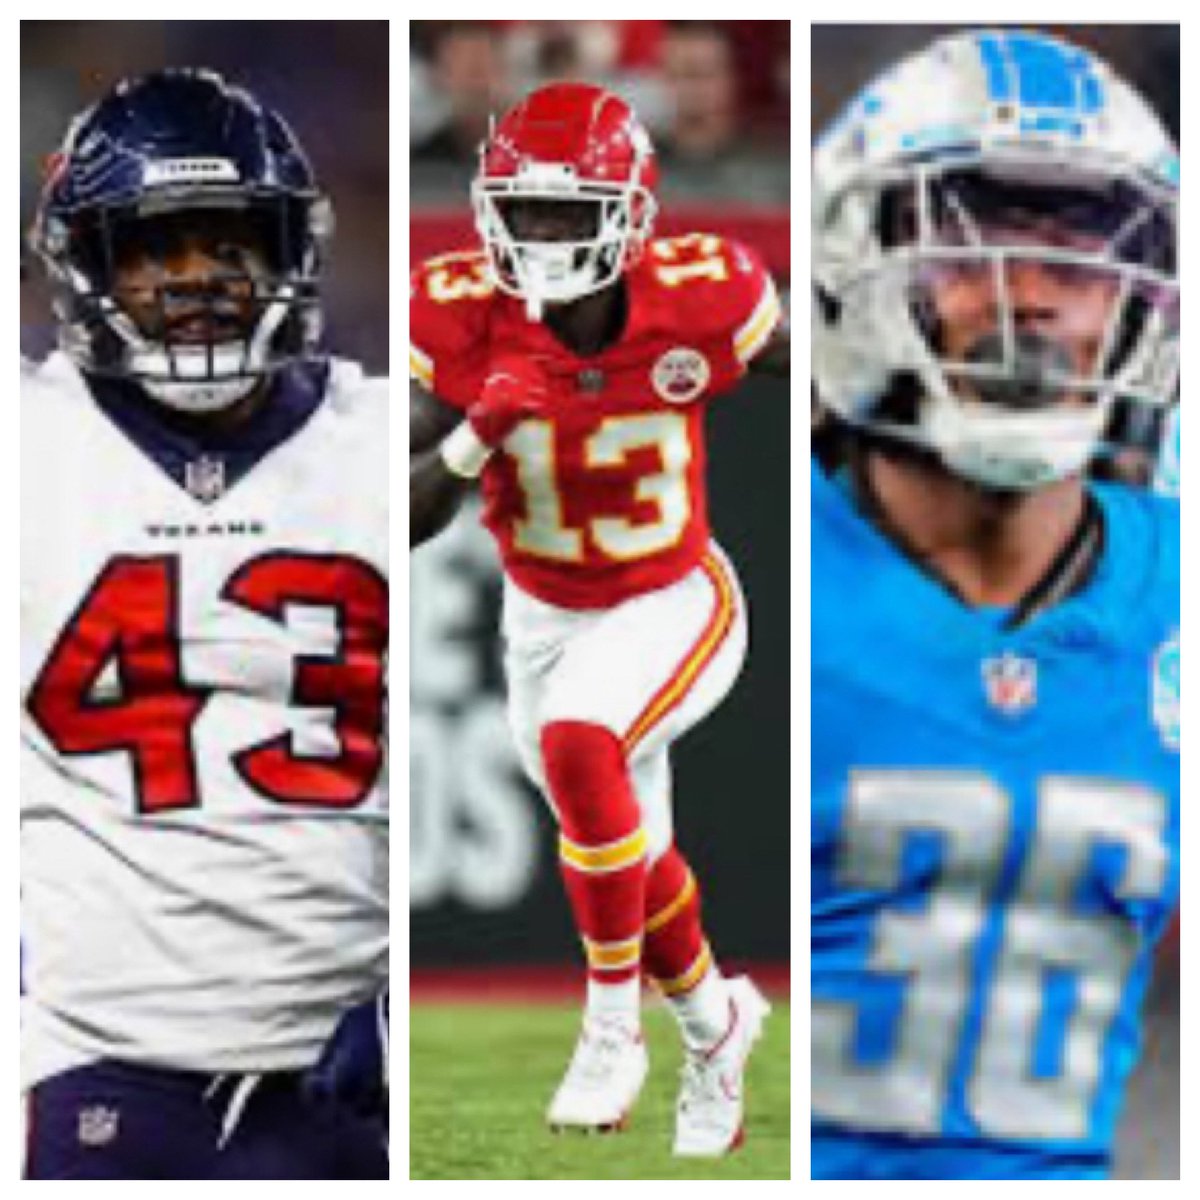 Congrats to former @HerdFB greats @Neville_Hewitt of @HoustonTexans, @JohnsonNazeeh of @Chiefs and @toofyegilmore of @Lions on winning in @NFL first round of the playoffs. We are proud of you and your repping Herd Nation!! #HerdFamily #OneHerd #HerdBrotherhood